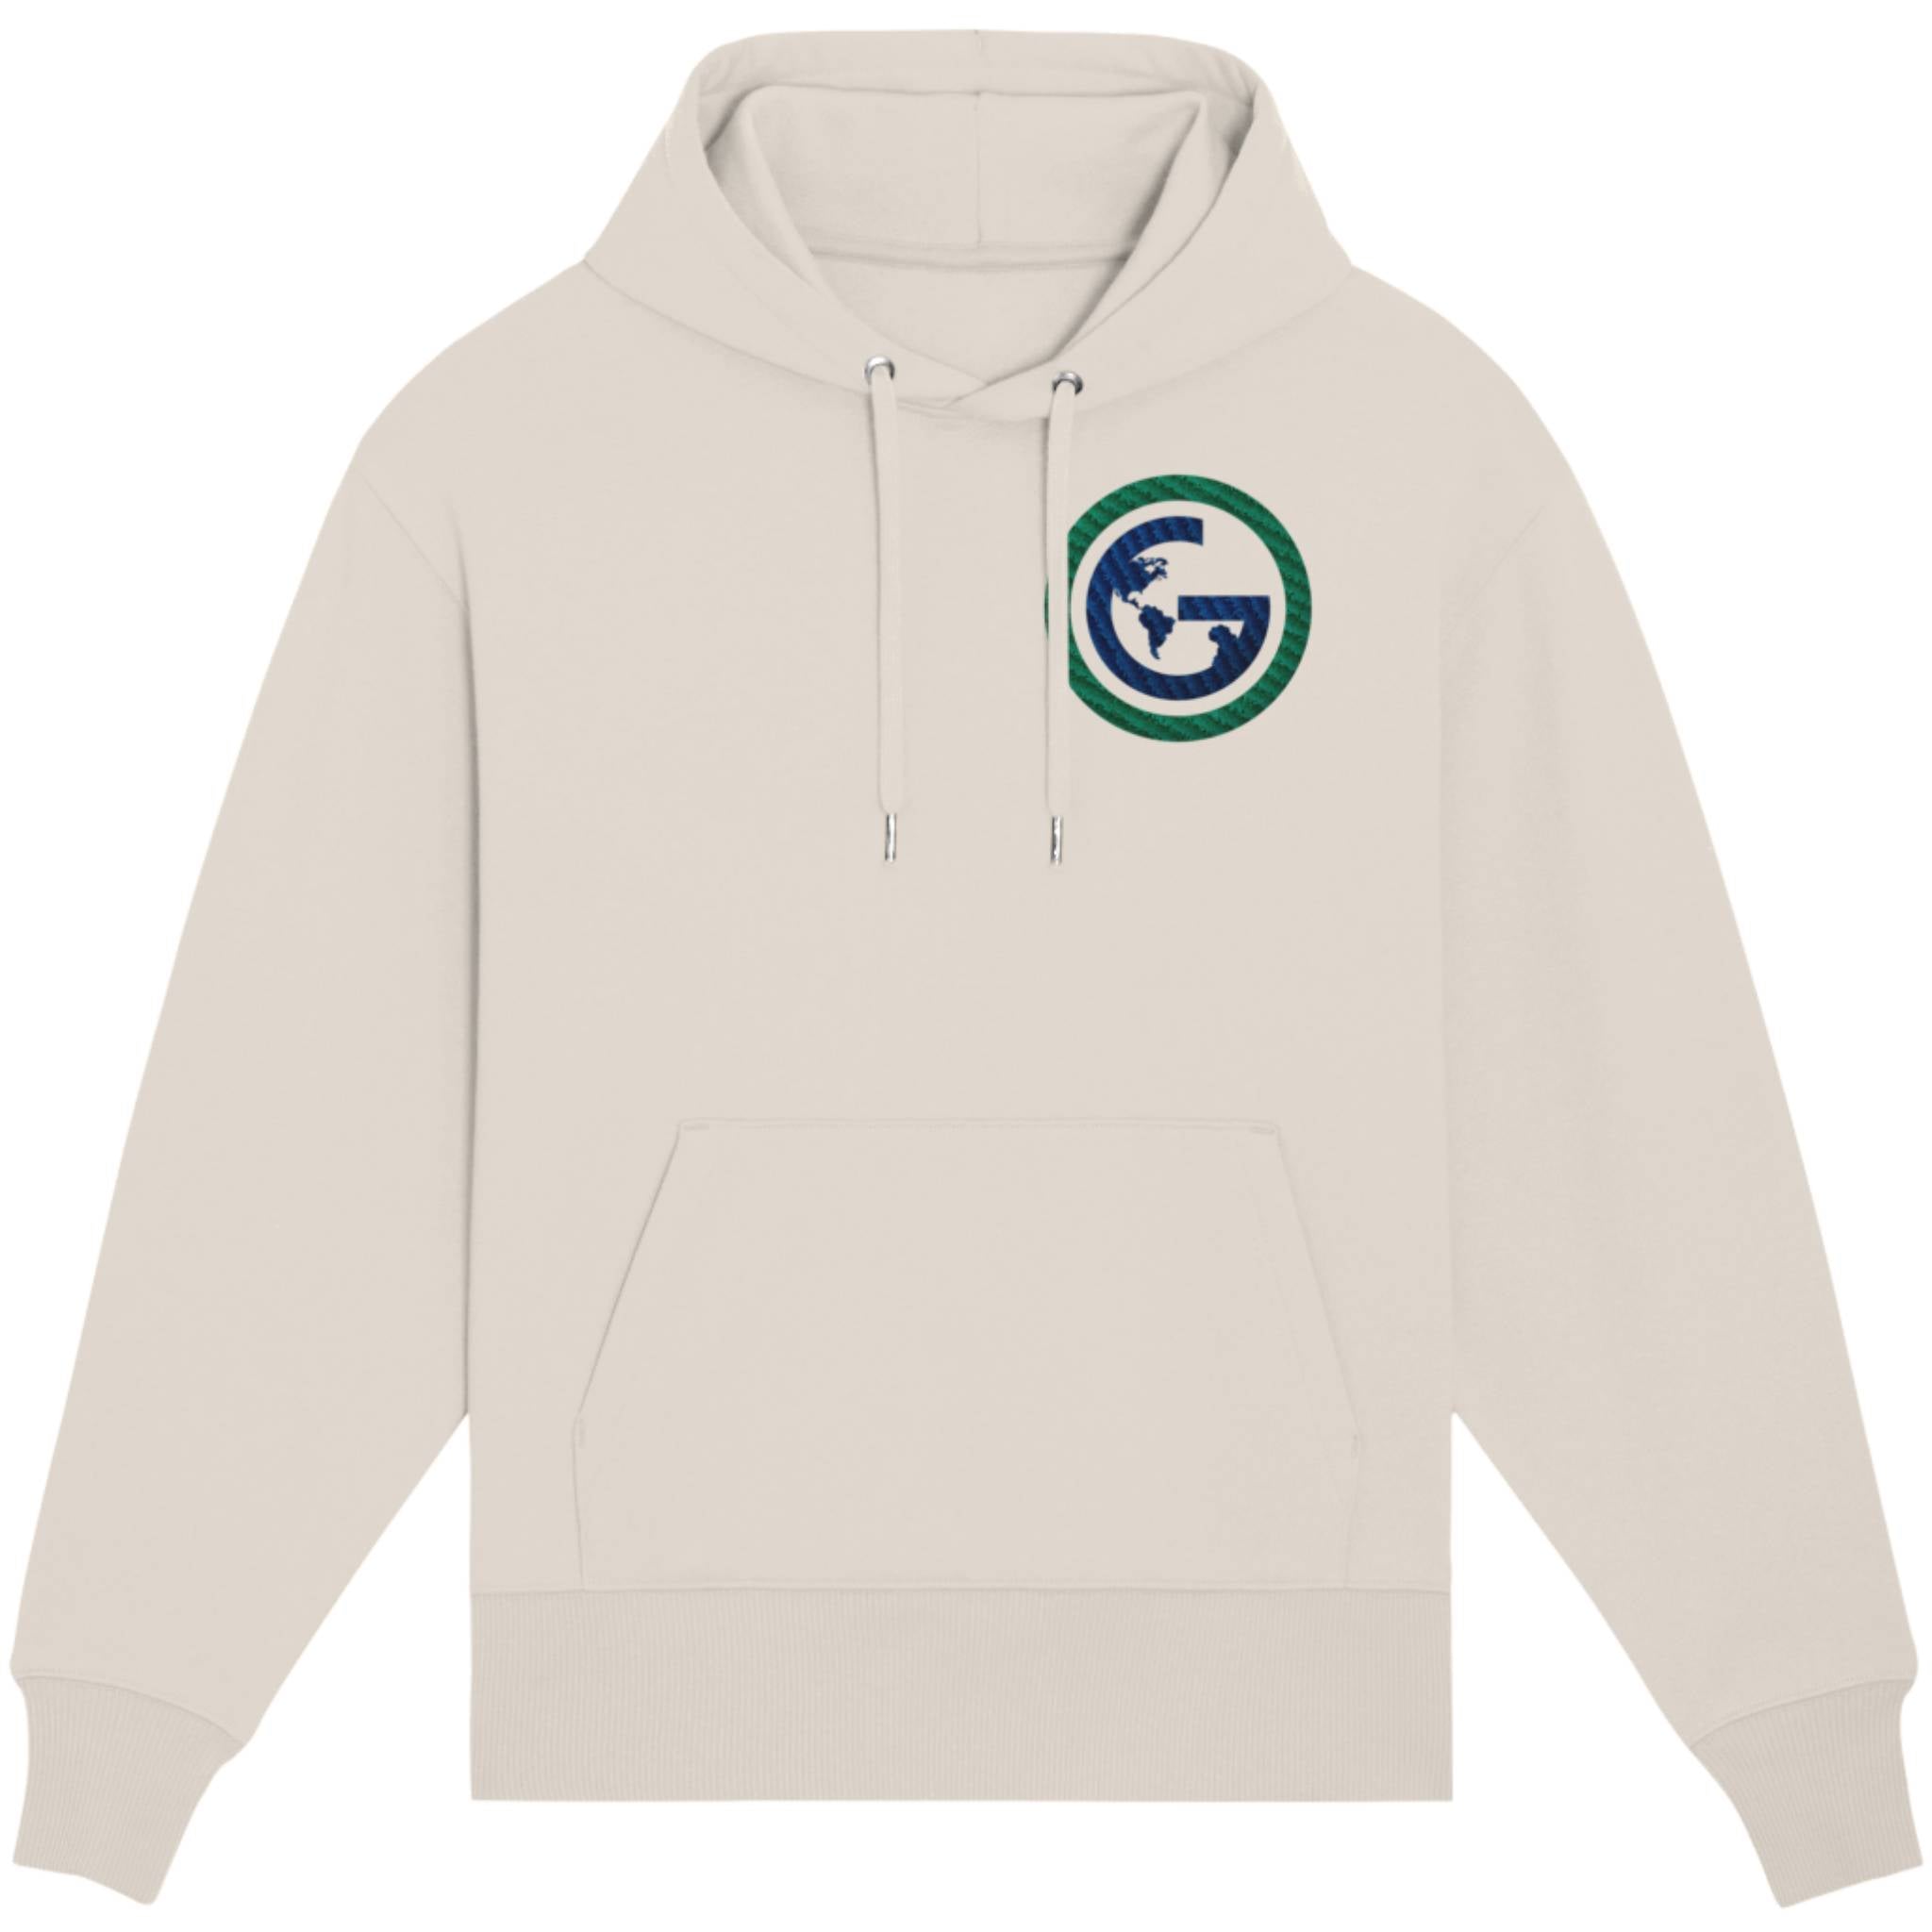 EcoLuxe Hoodie Sweatshirt | The Ultimate Organic Comfort Experience with Signature Style